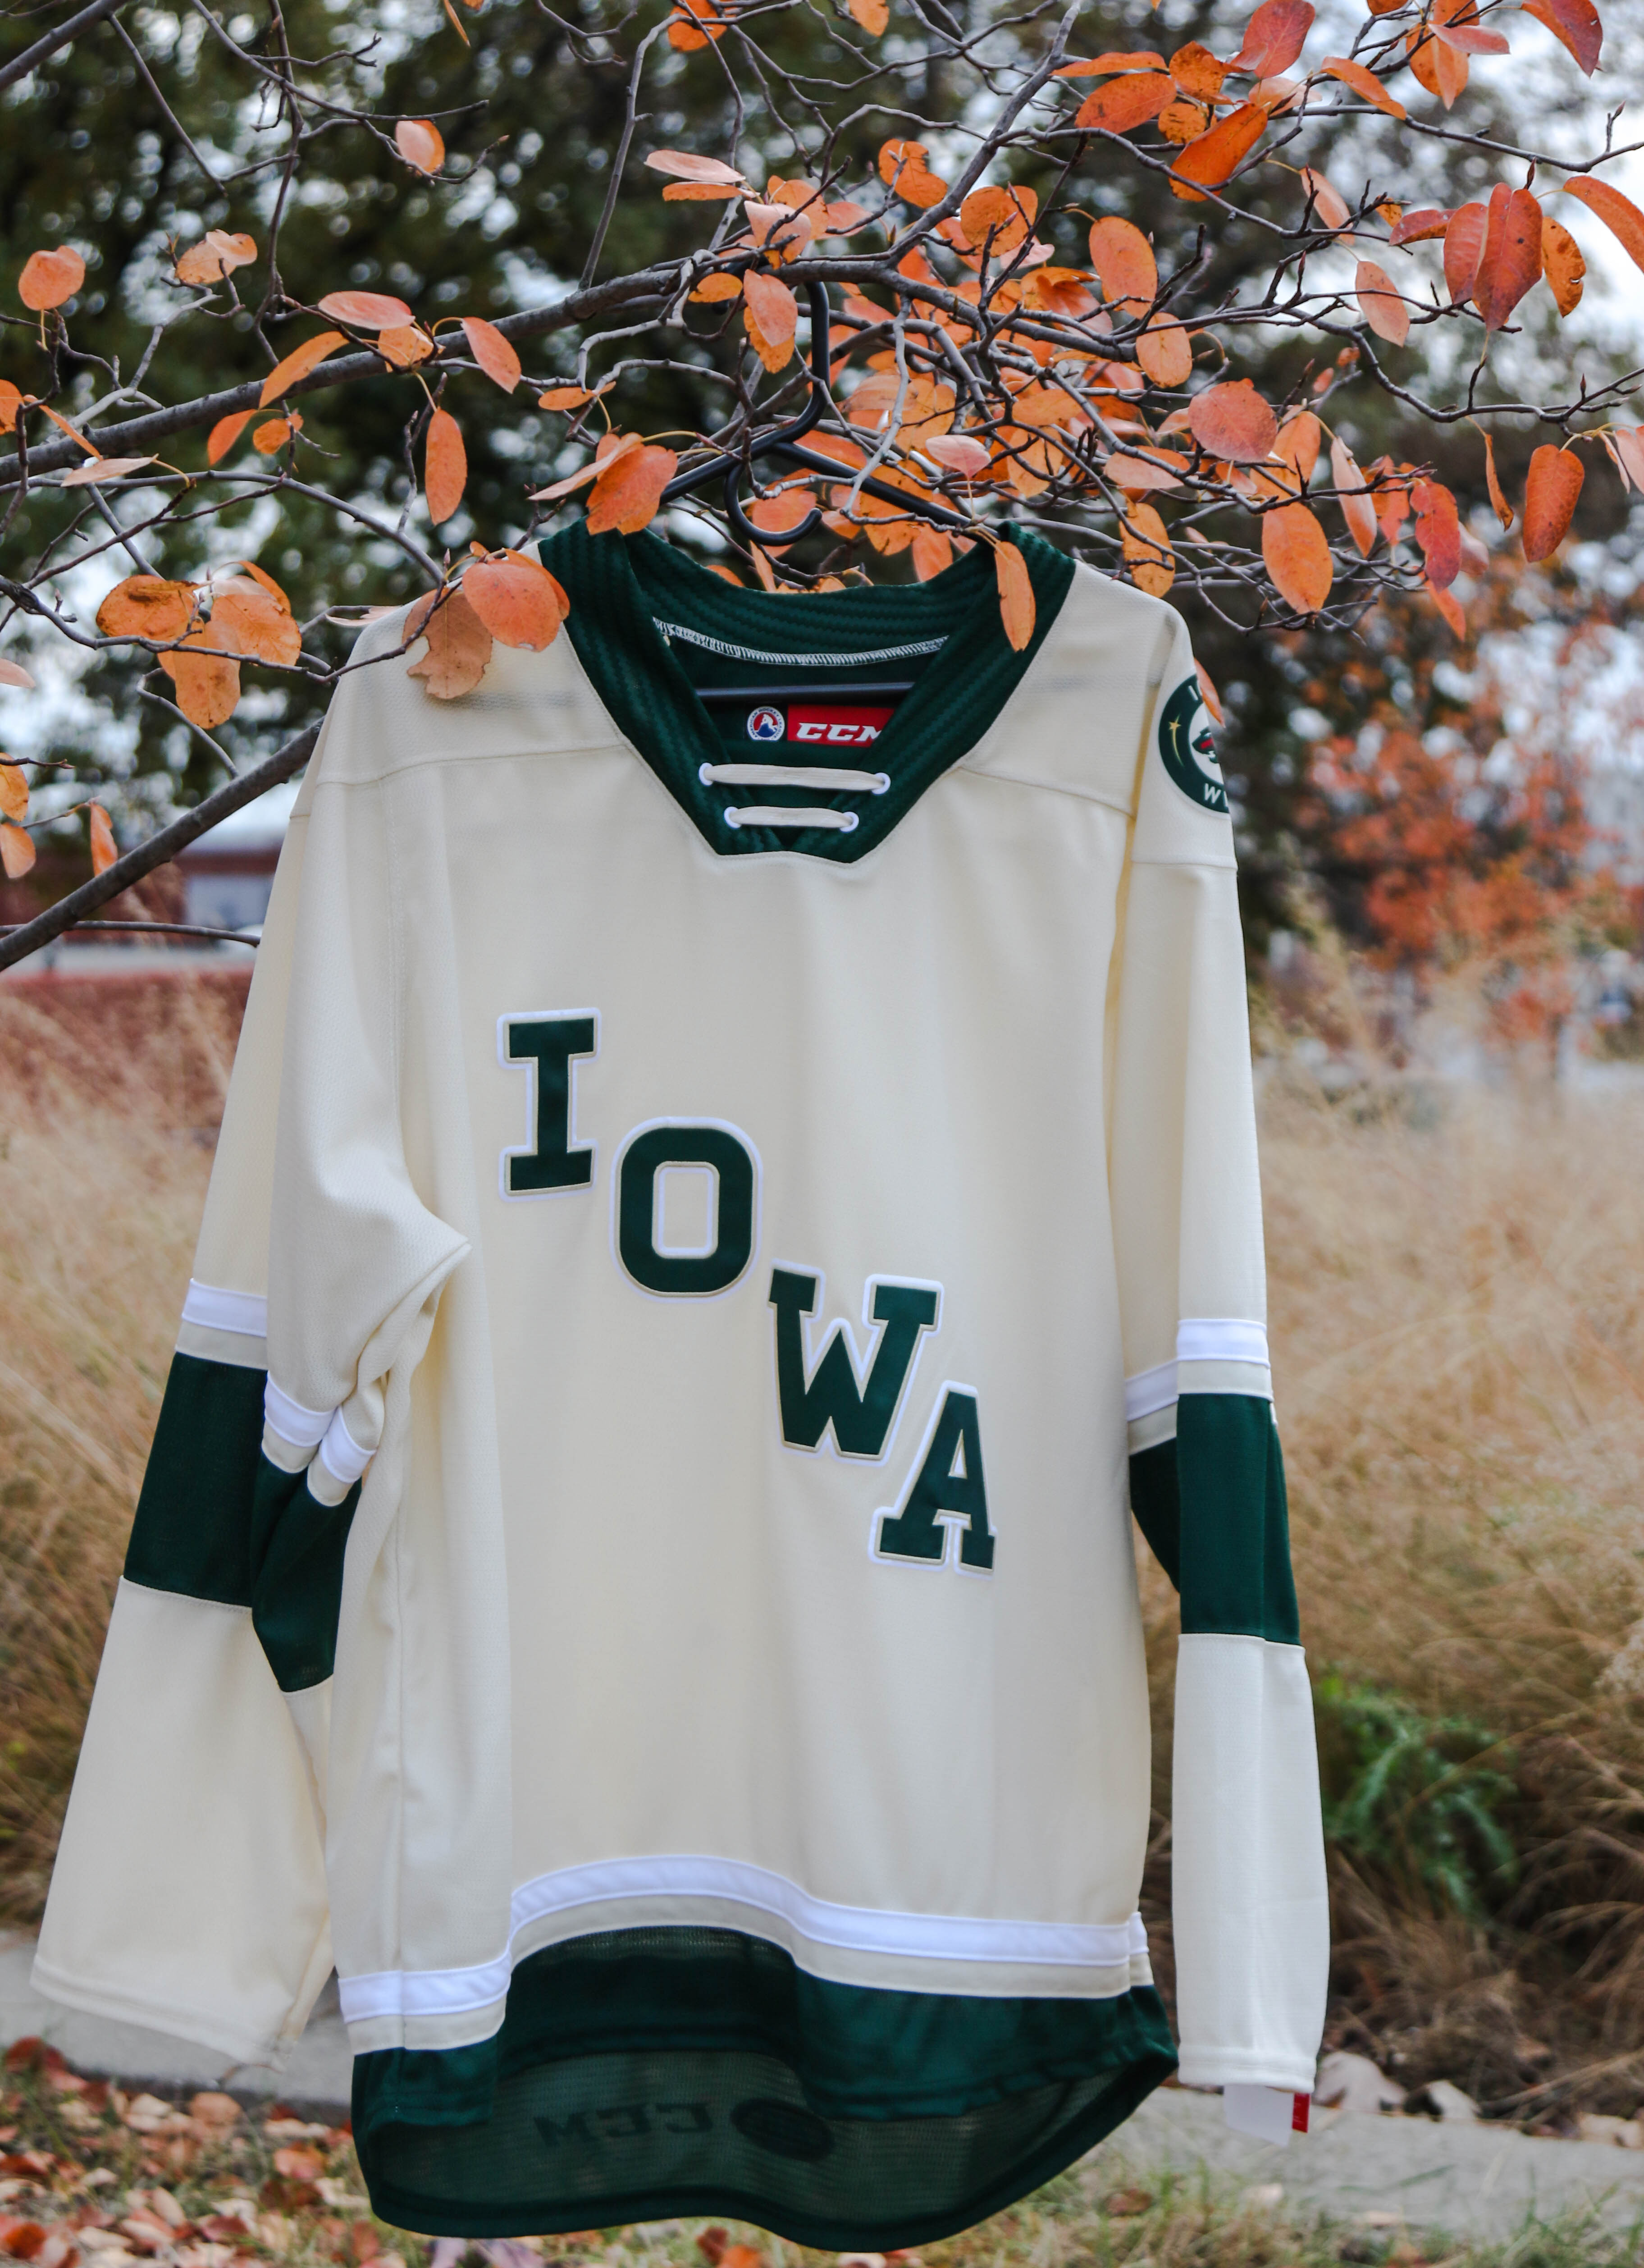 mn wild jerseys off our backs